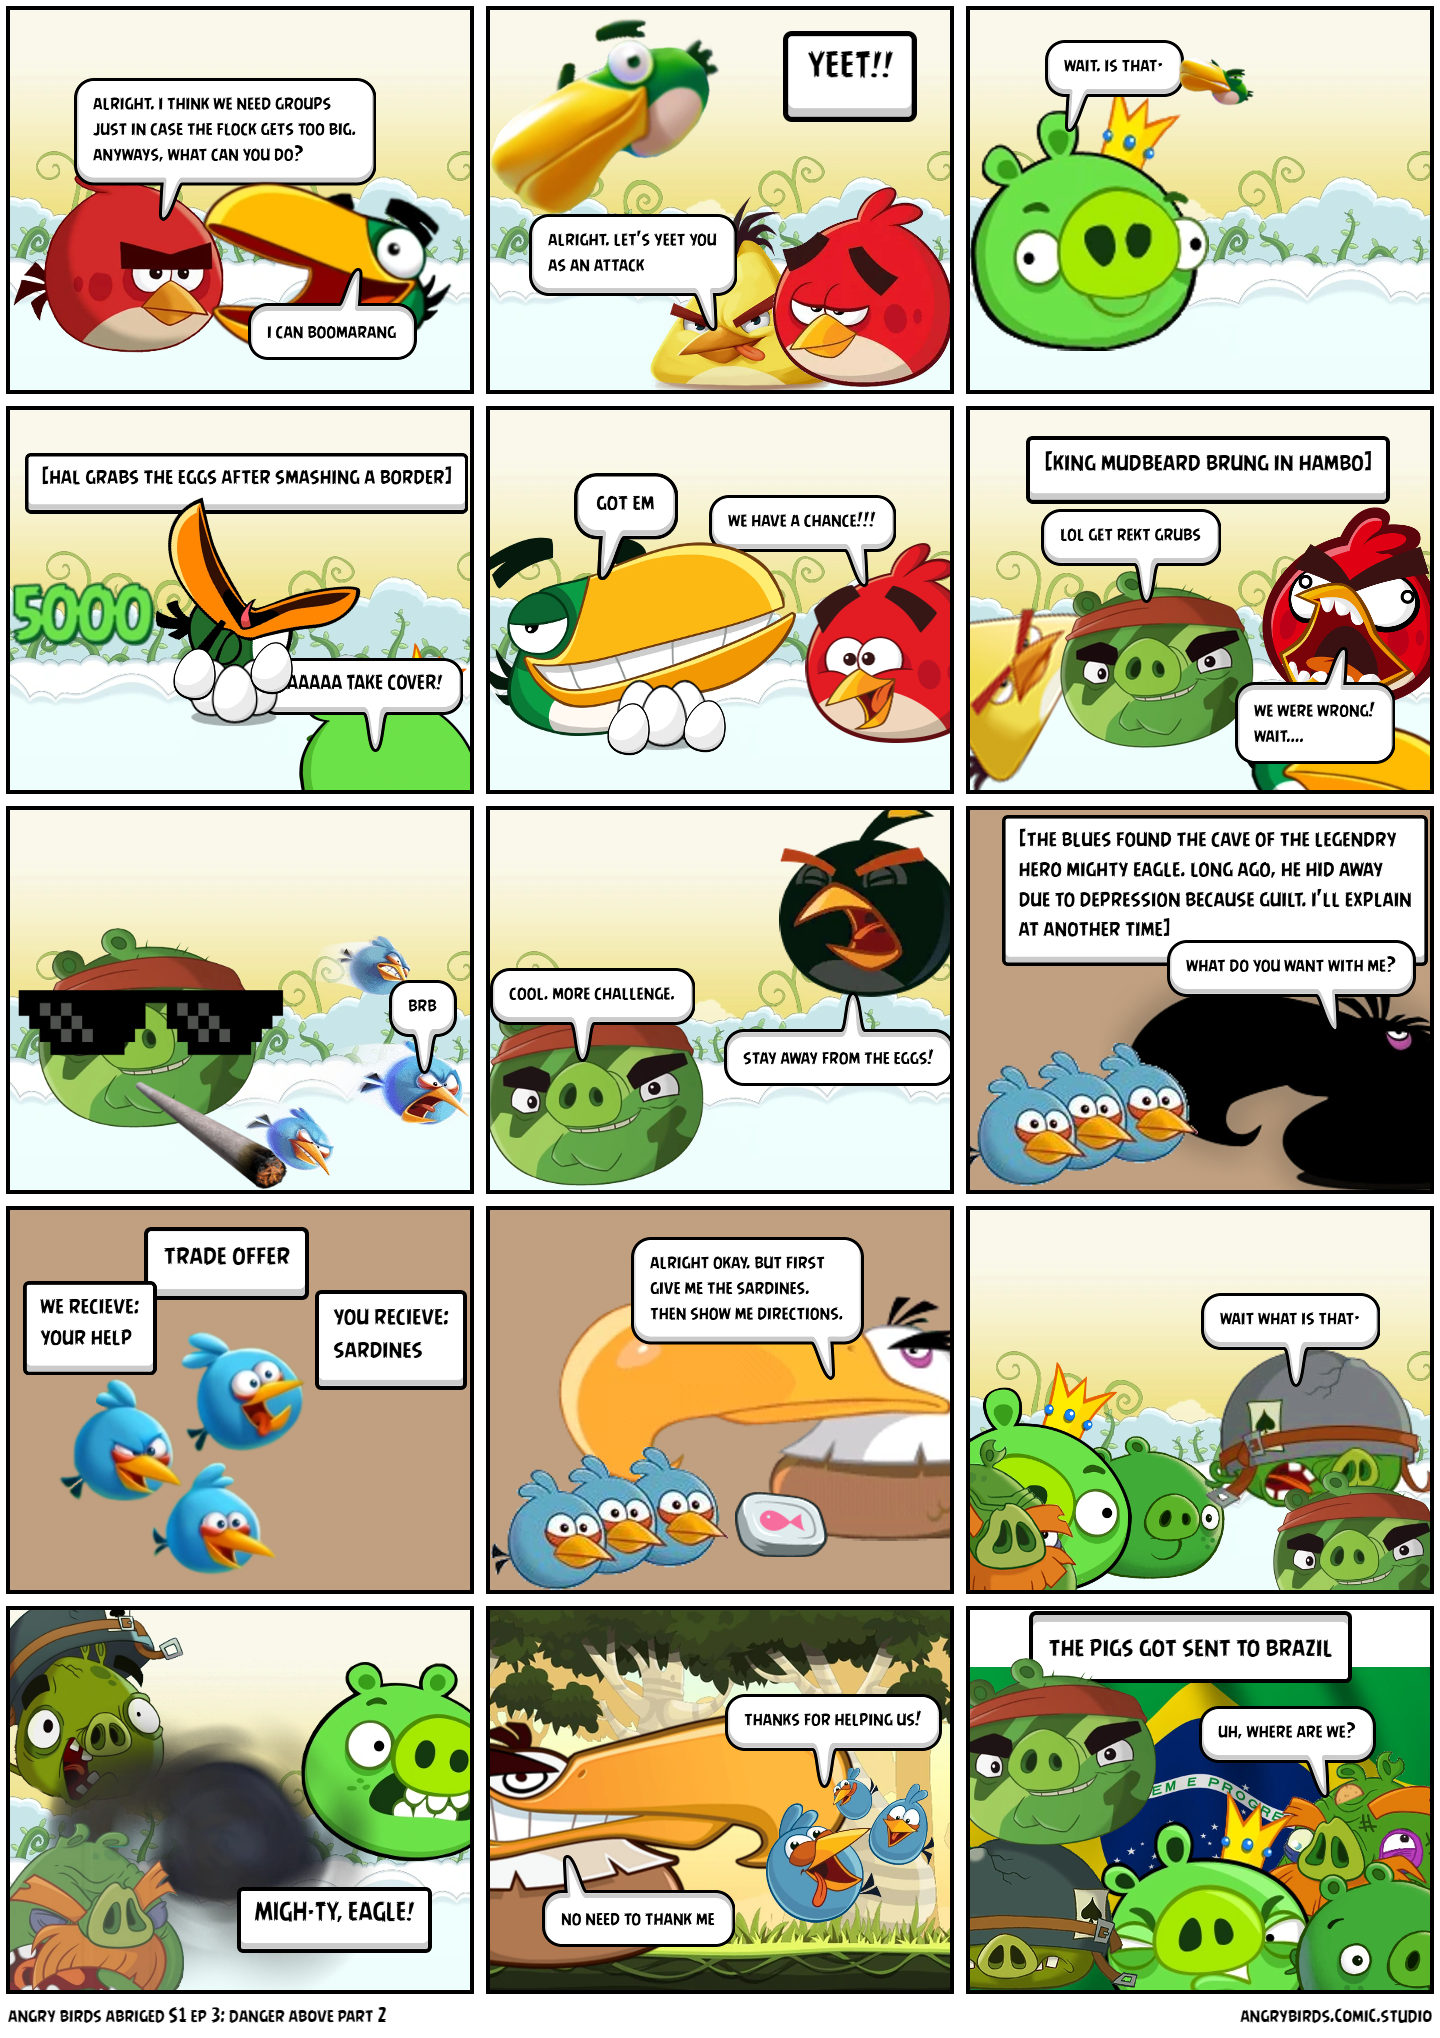 angry birds abriged S1 ep 3: danger above part 2